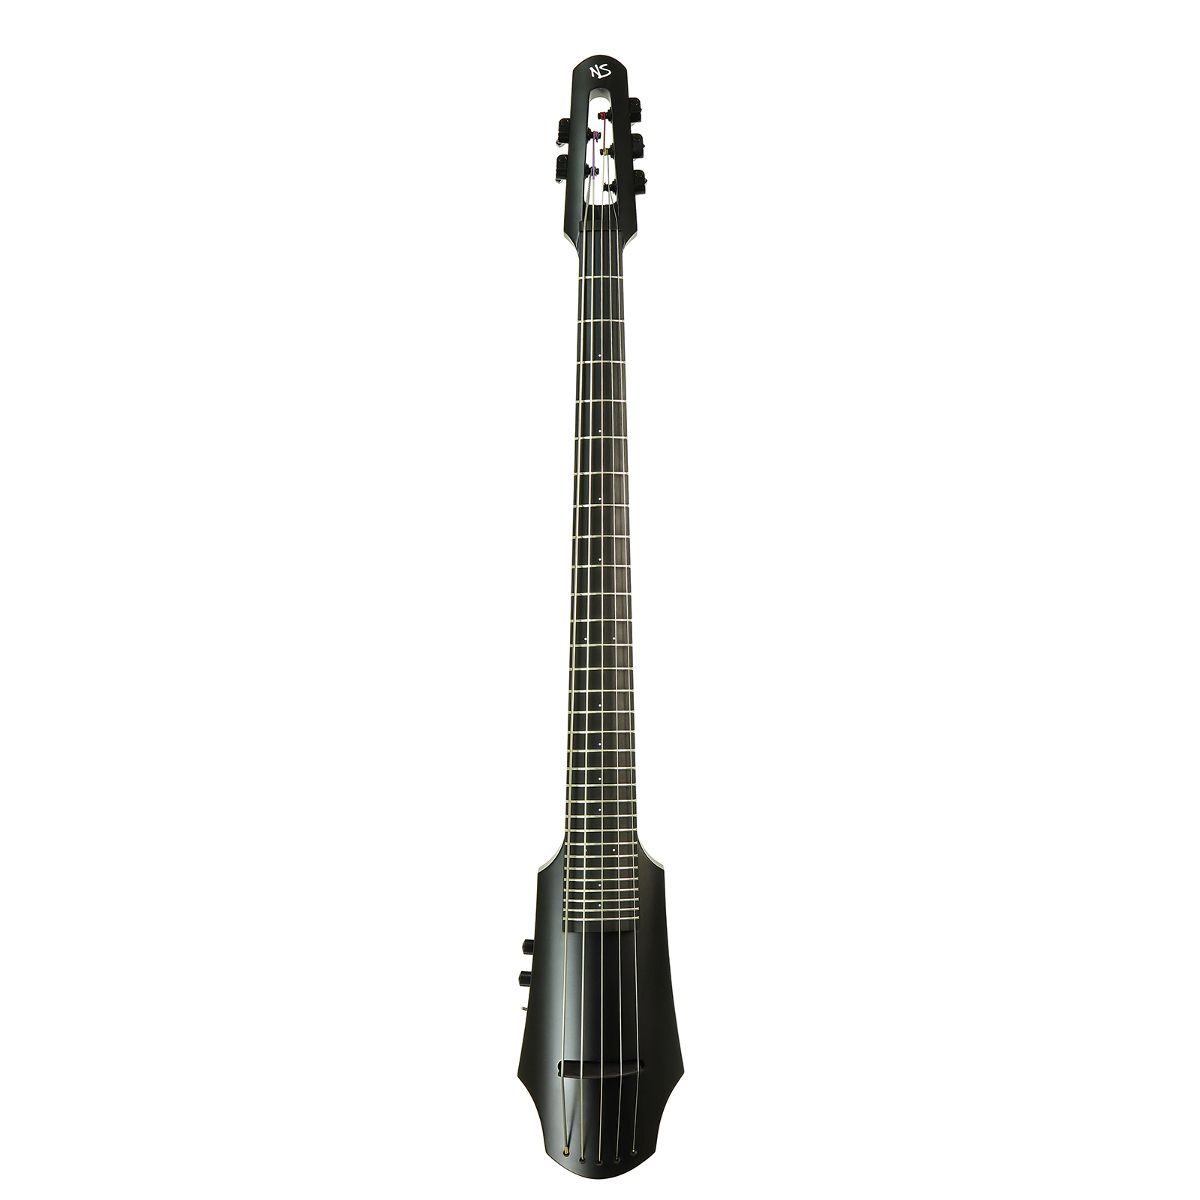 NS Design NXTa 5-string Fretted Electric Cello